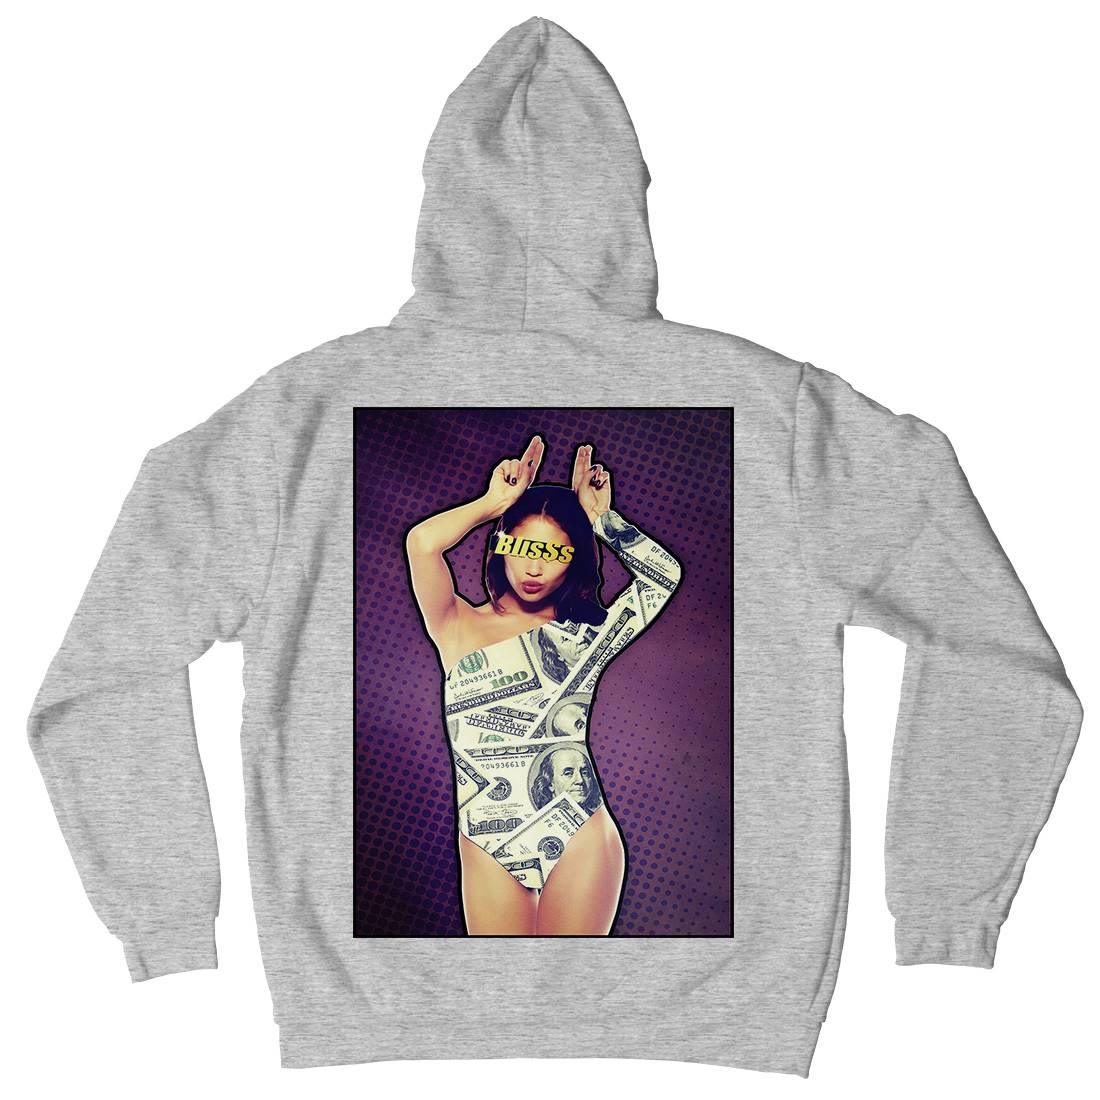 This Is Bliss Kids Crew Neck Hoodie Art A928